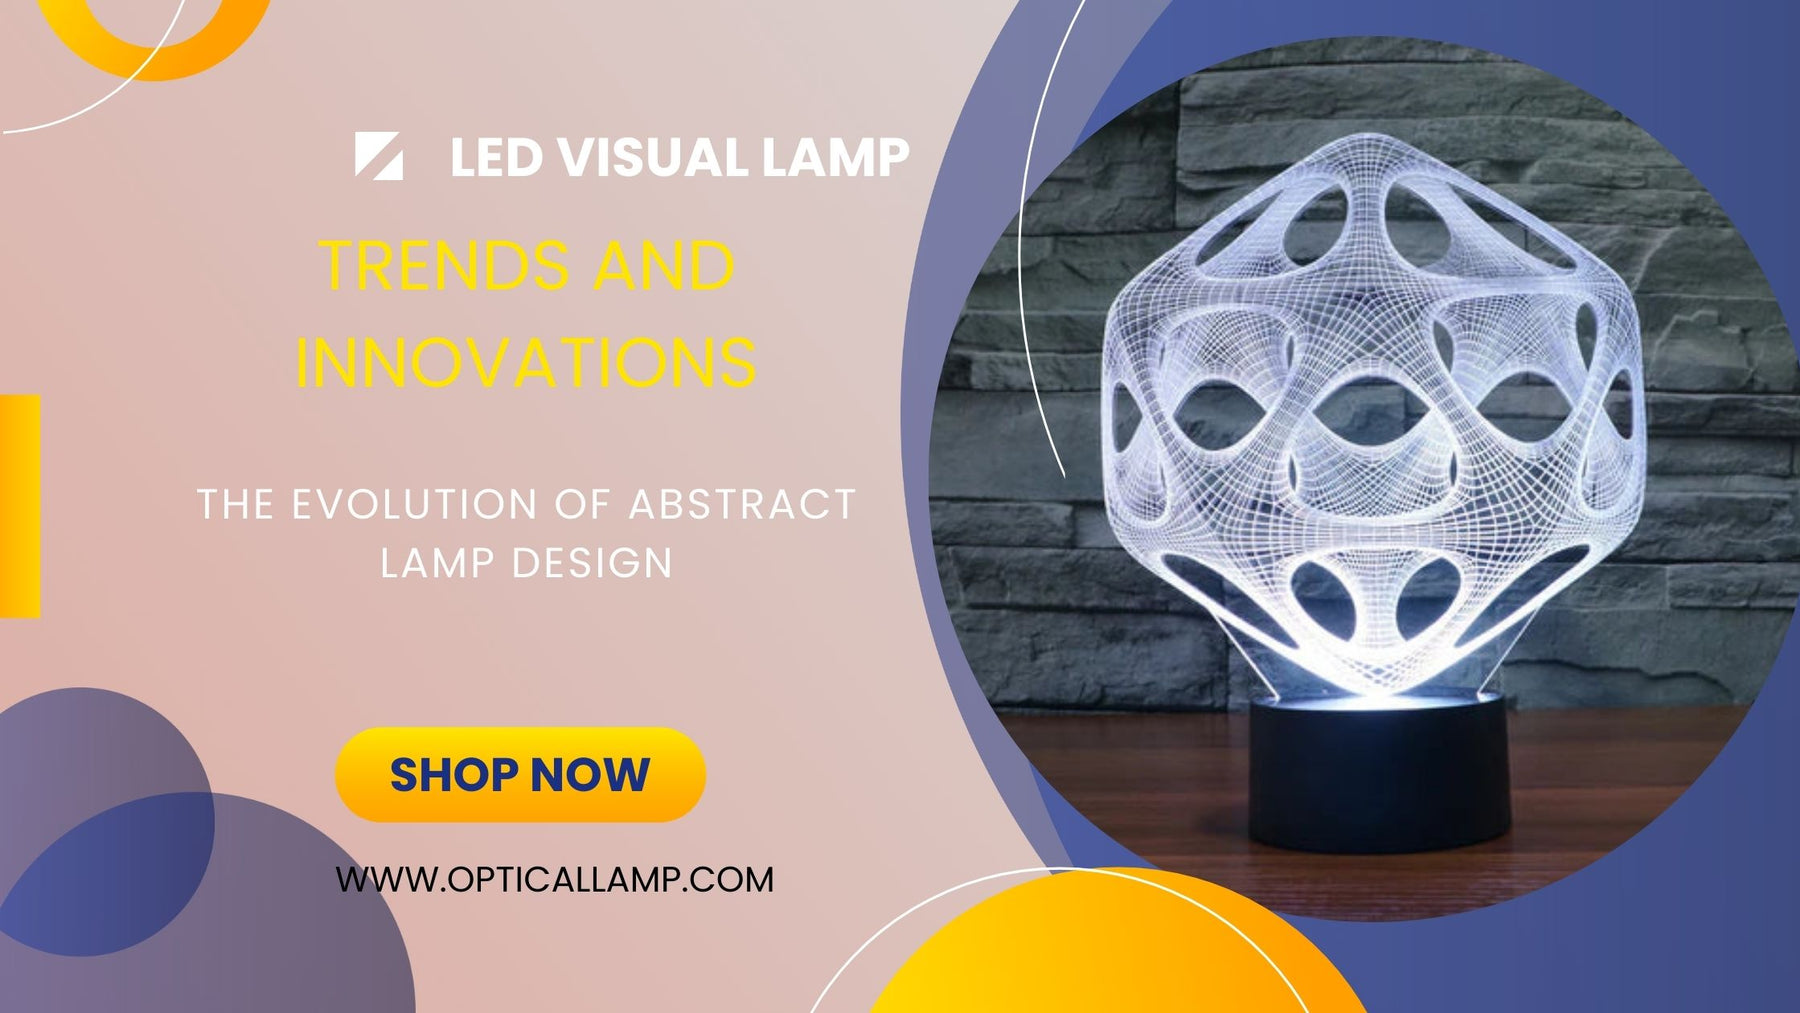 The Evolution of Abstract Lamp Design: Trends and Innovations